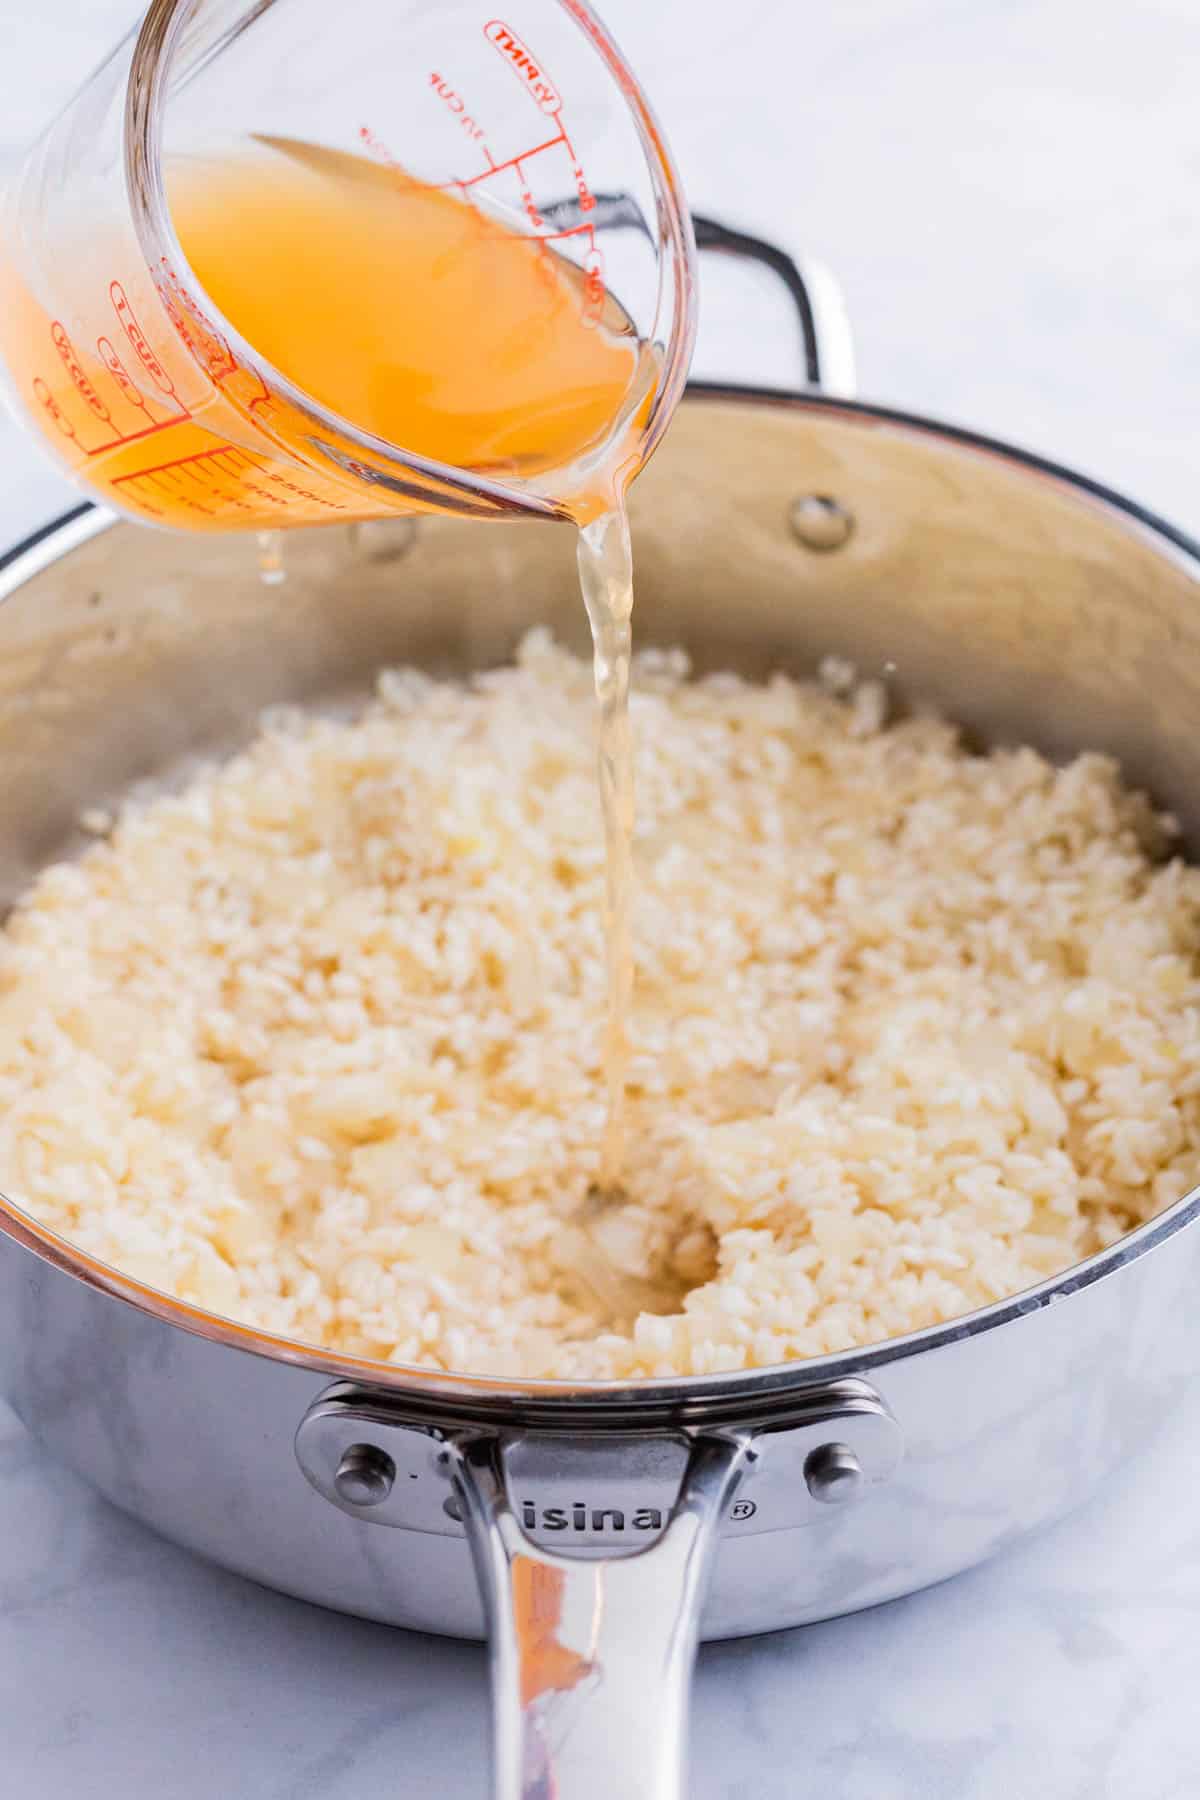 Broth is slowly added to the risotto in a pot.